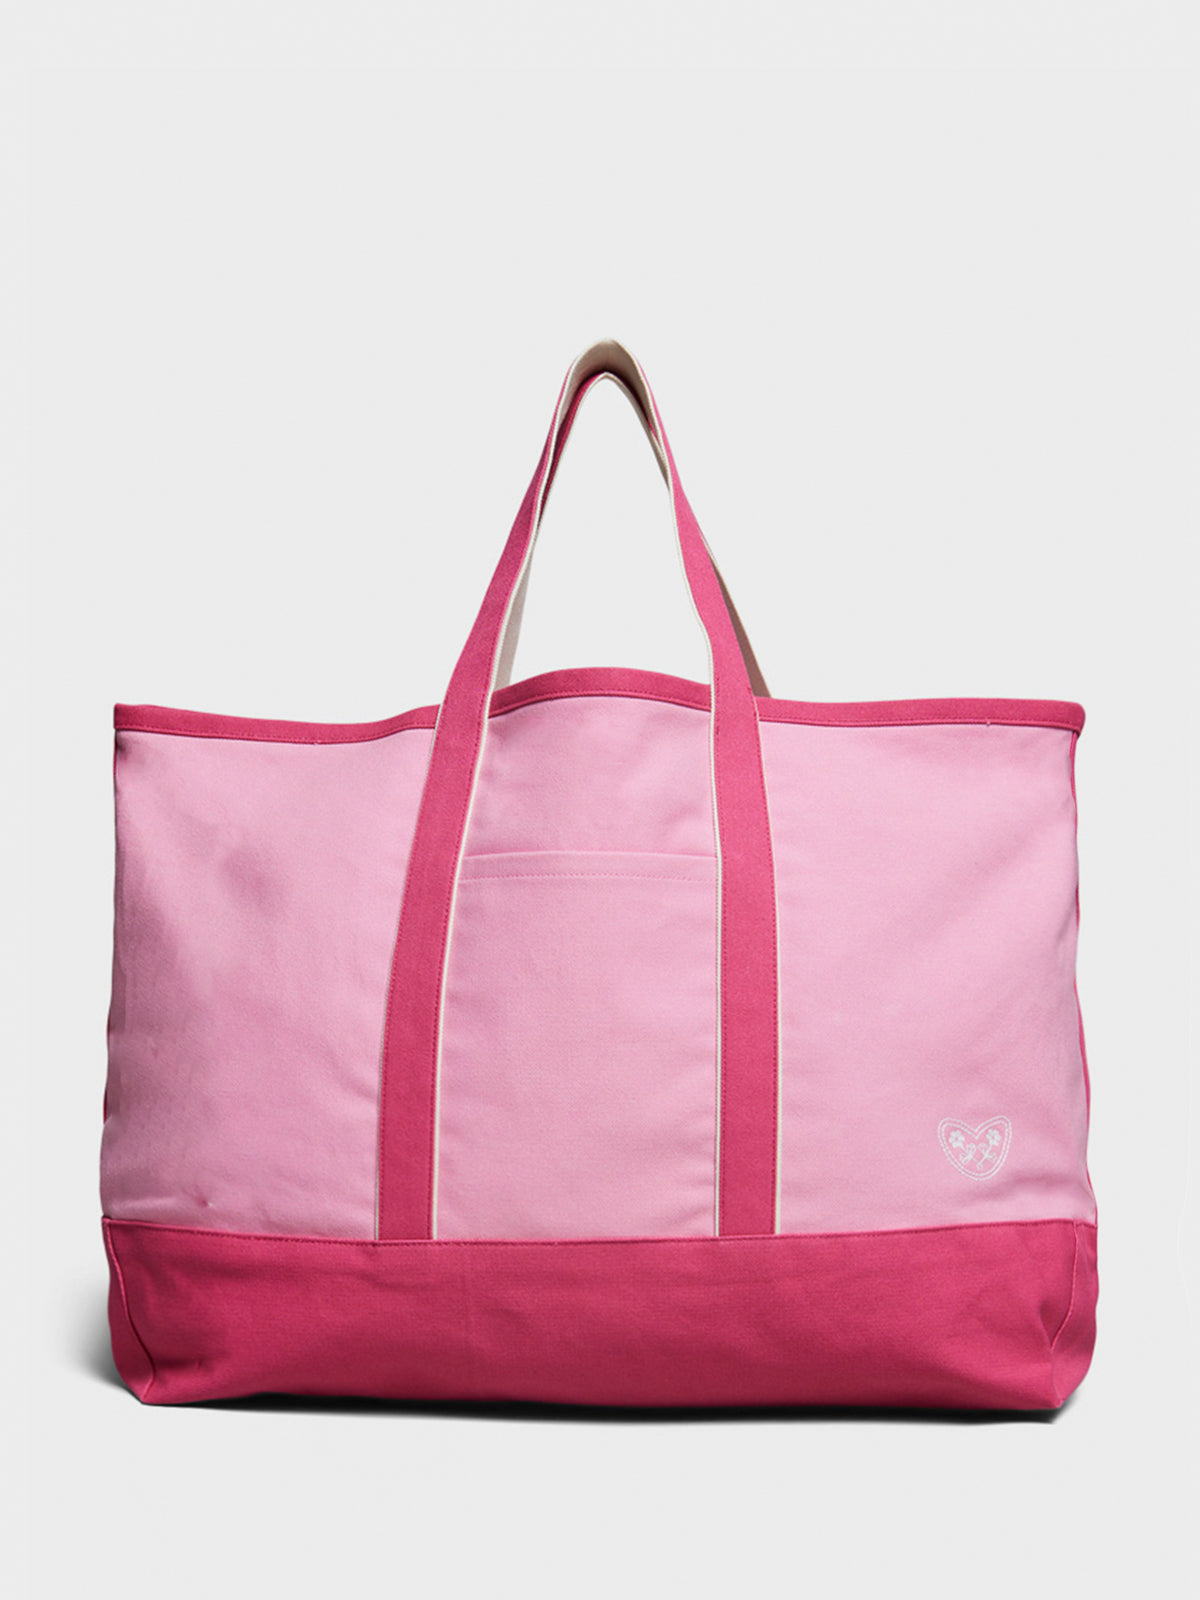 Easy Bag Large in Pink